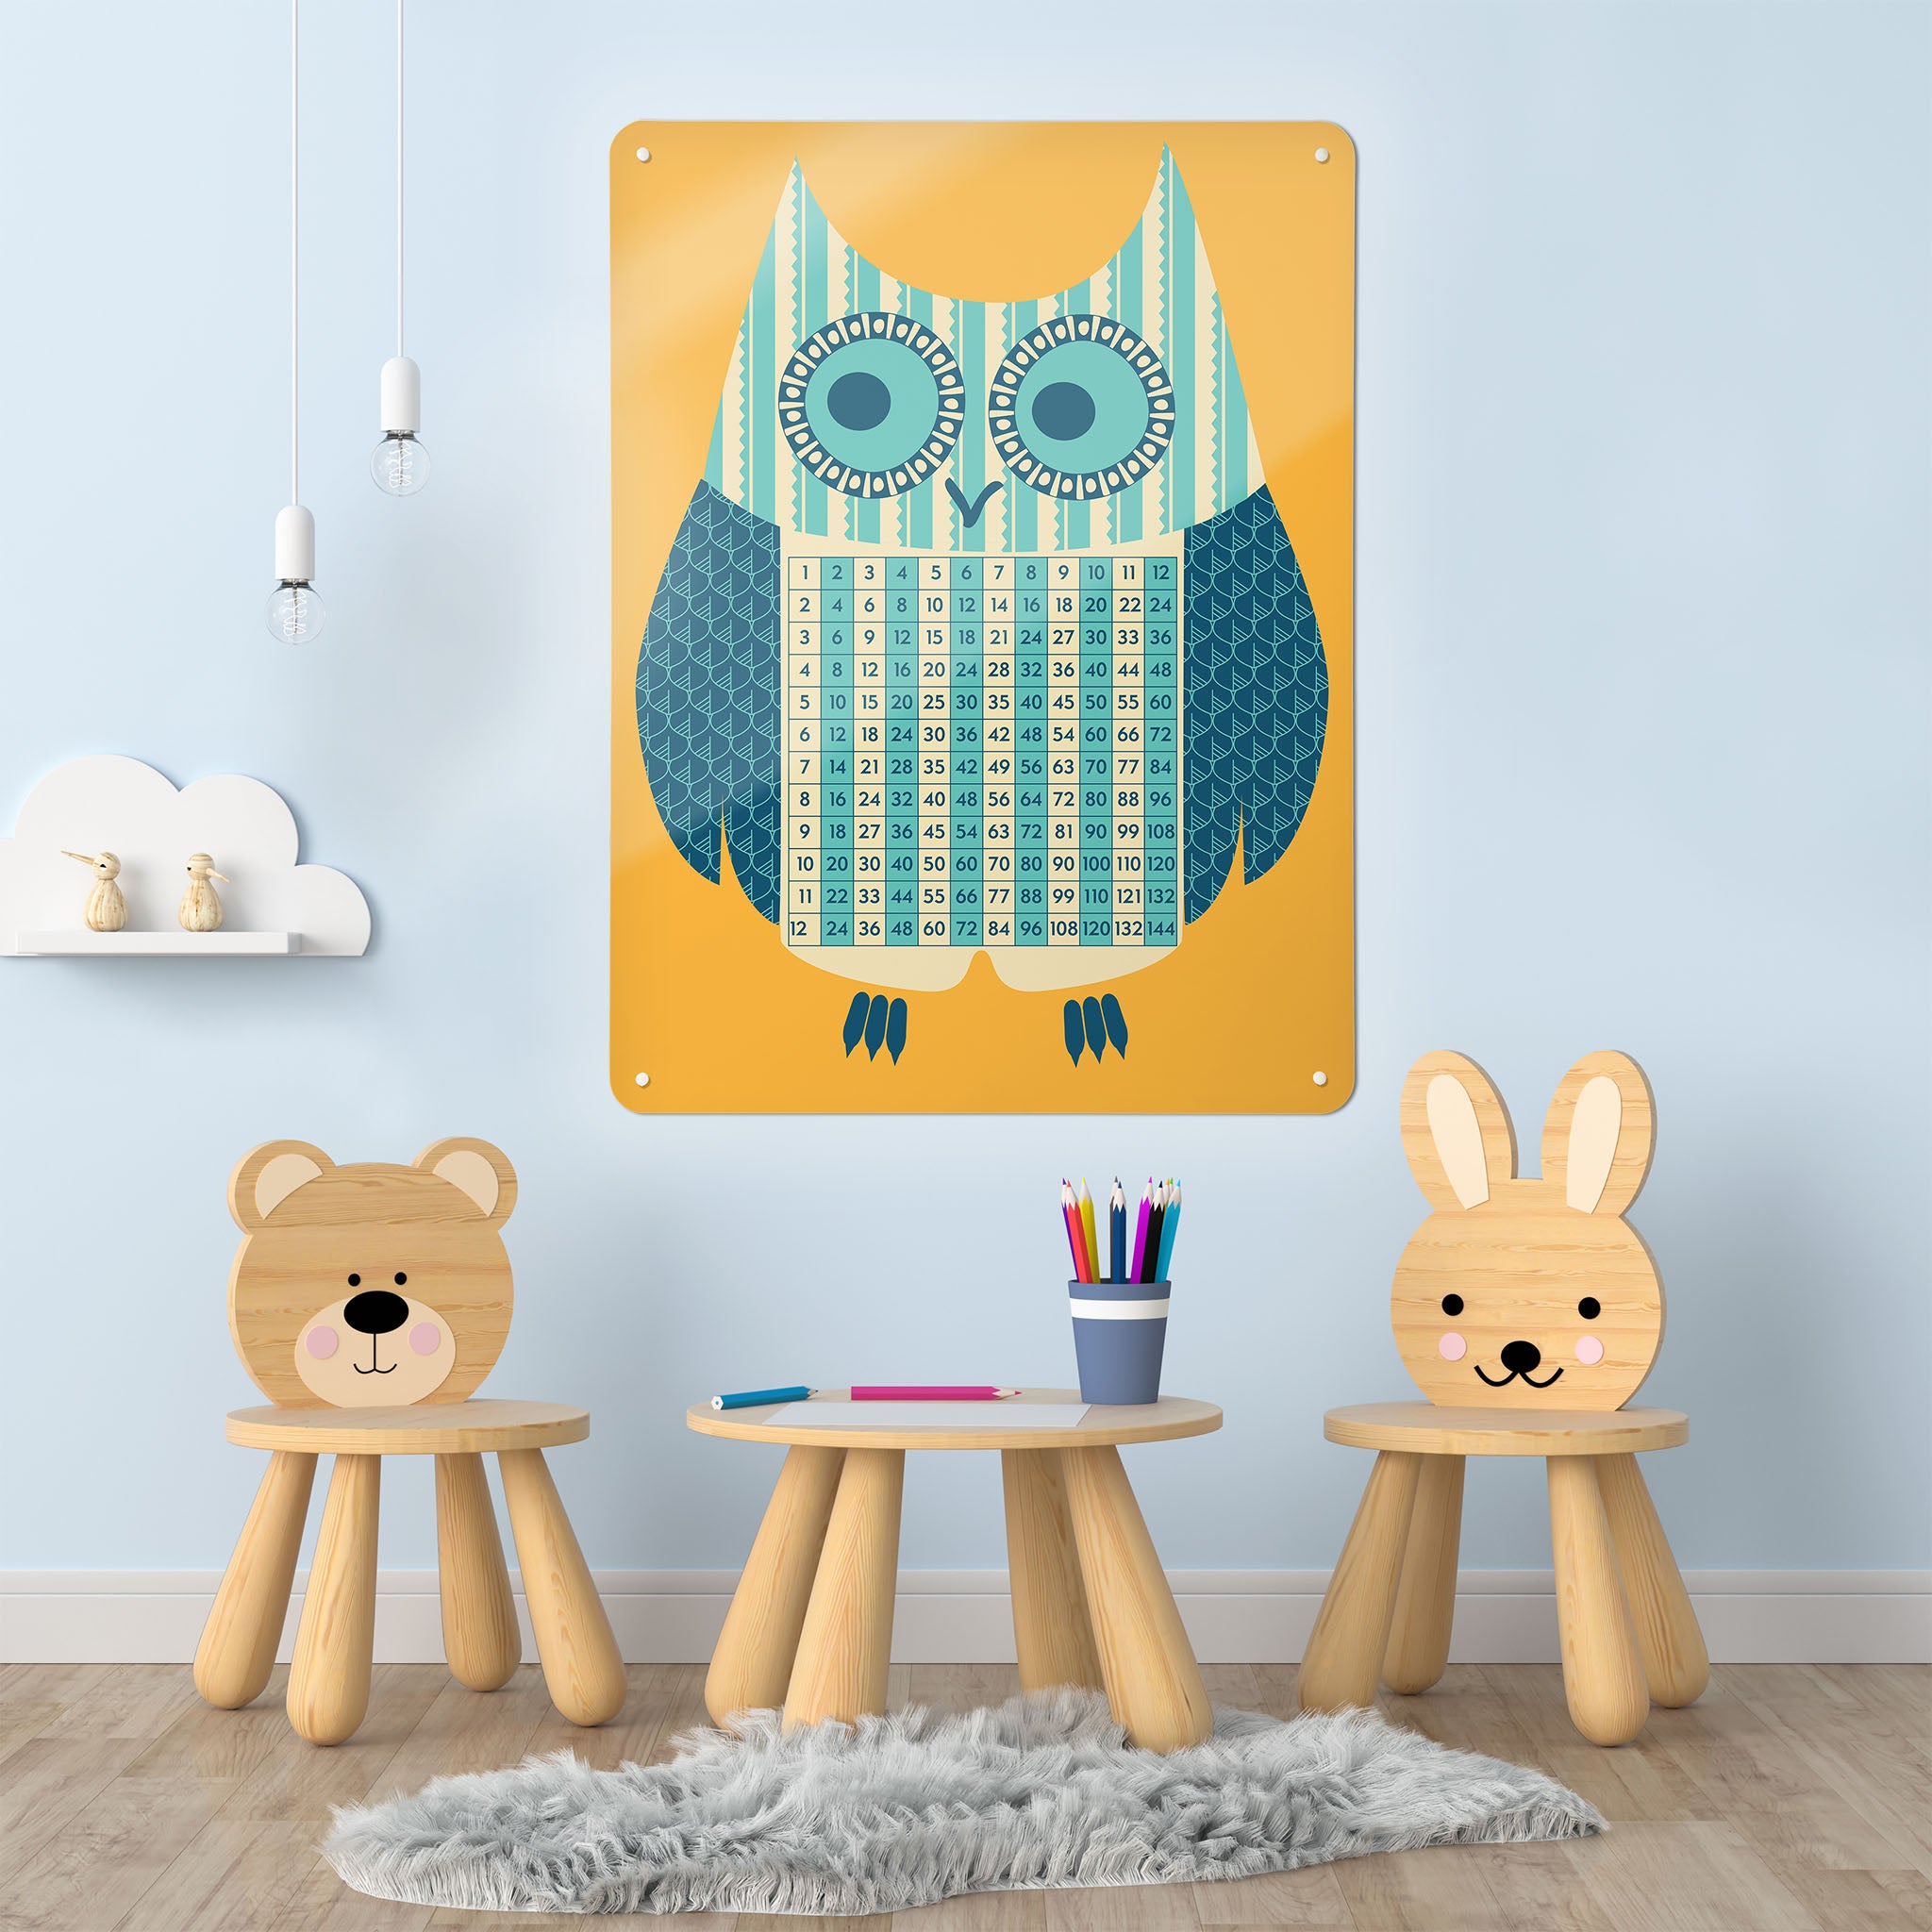 A playroom interior with a magnetic metal wall art panel showing an illustration of an owl with a times tables design in blue, cream, teal and orange